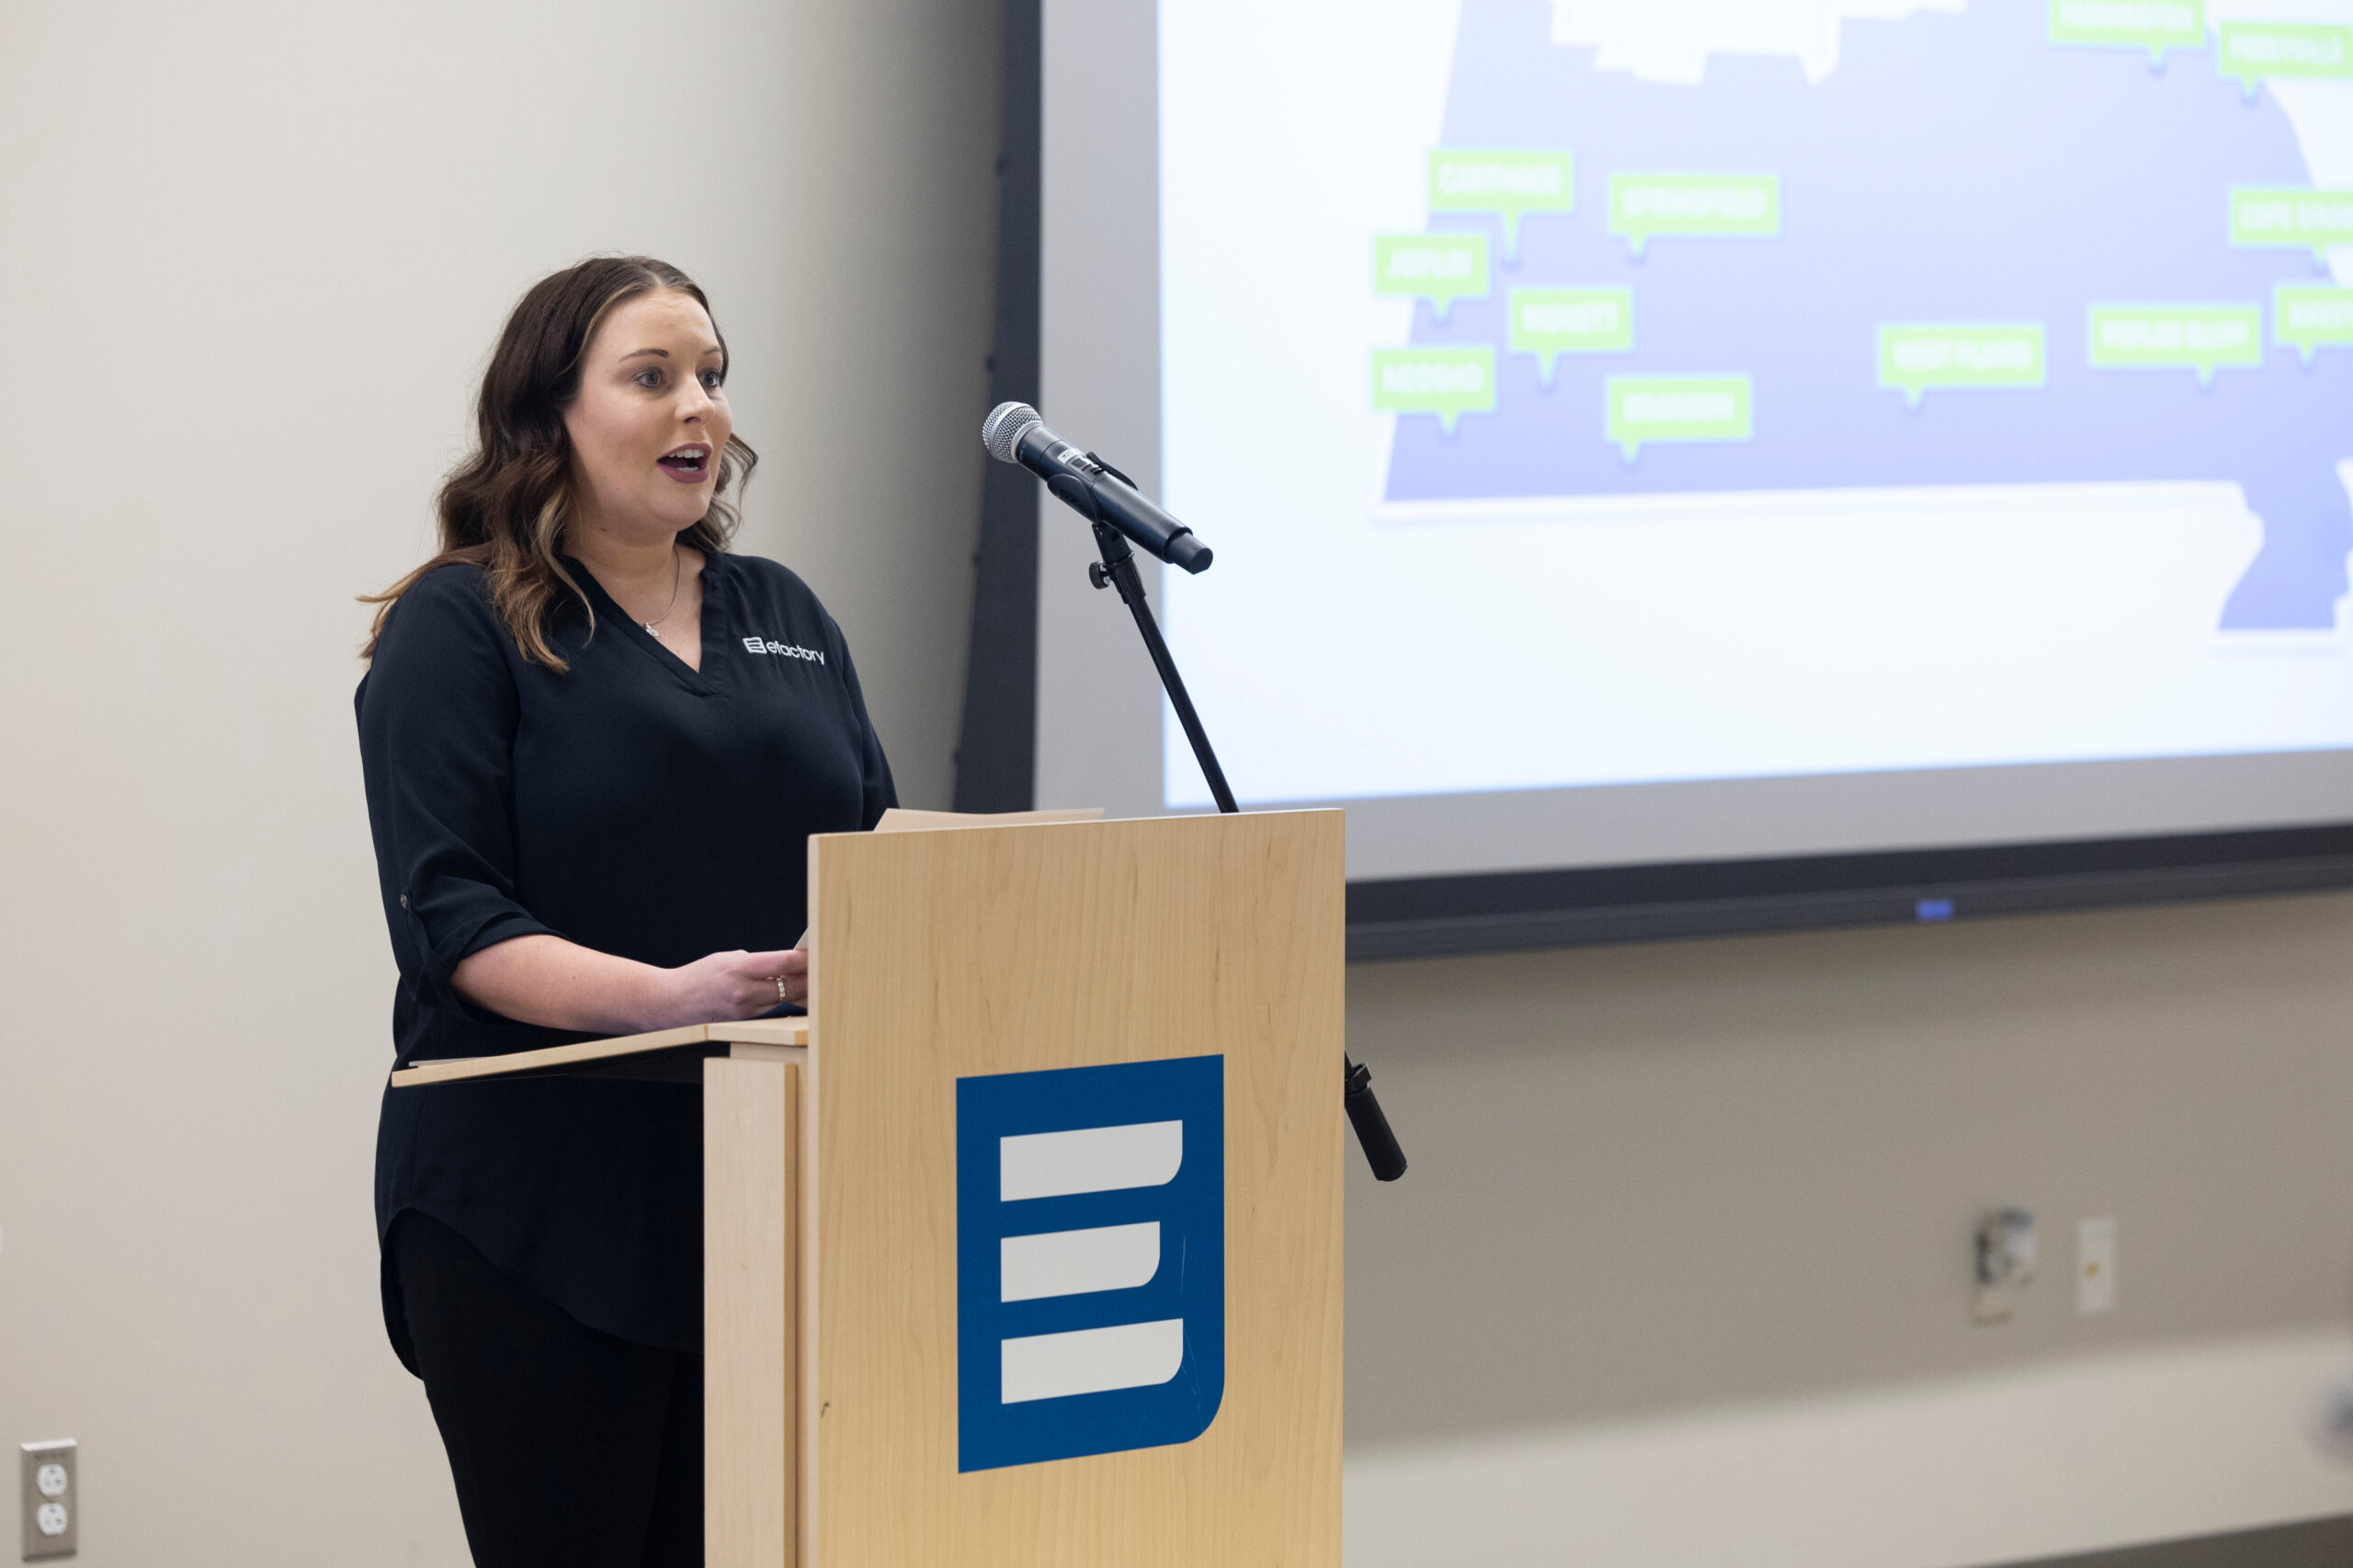 Rachel Anderson, executive director of efactory, shares about economic impact on the Souther Missouri Innovation Network, also known as Innovate SOMO.